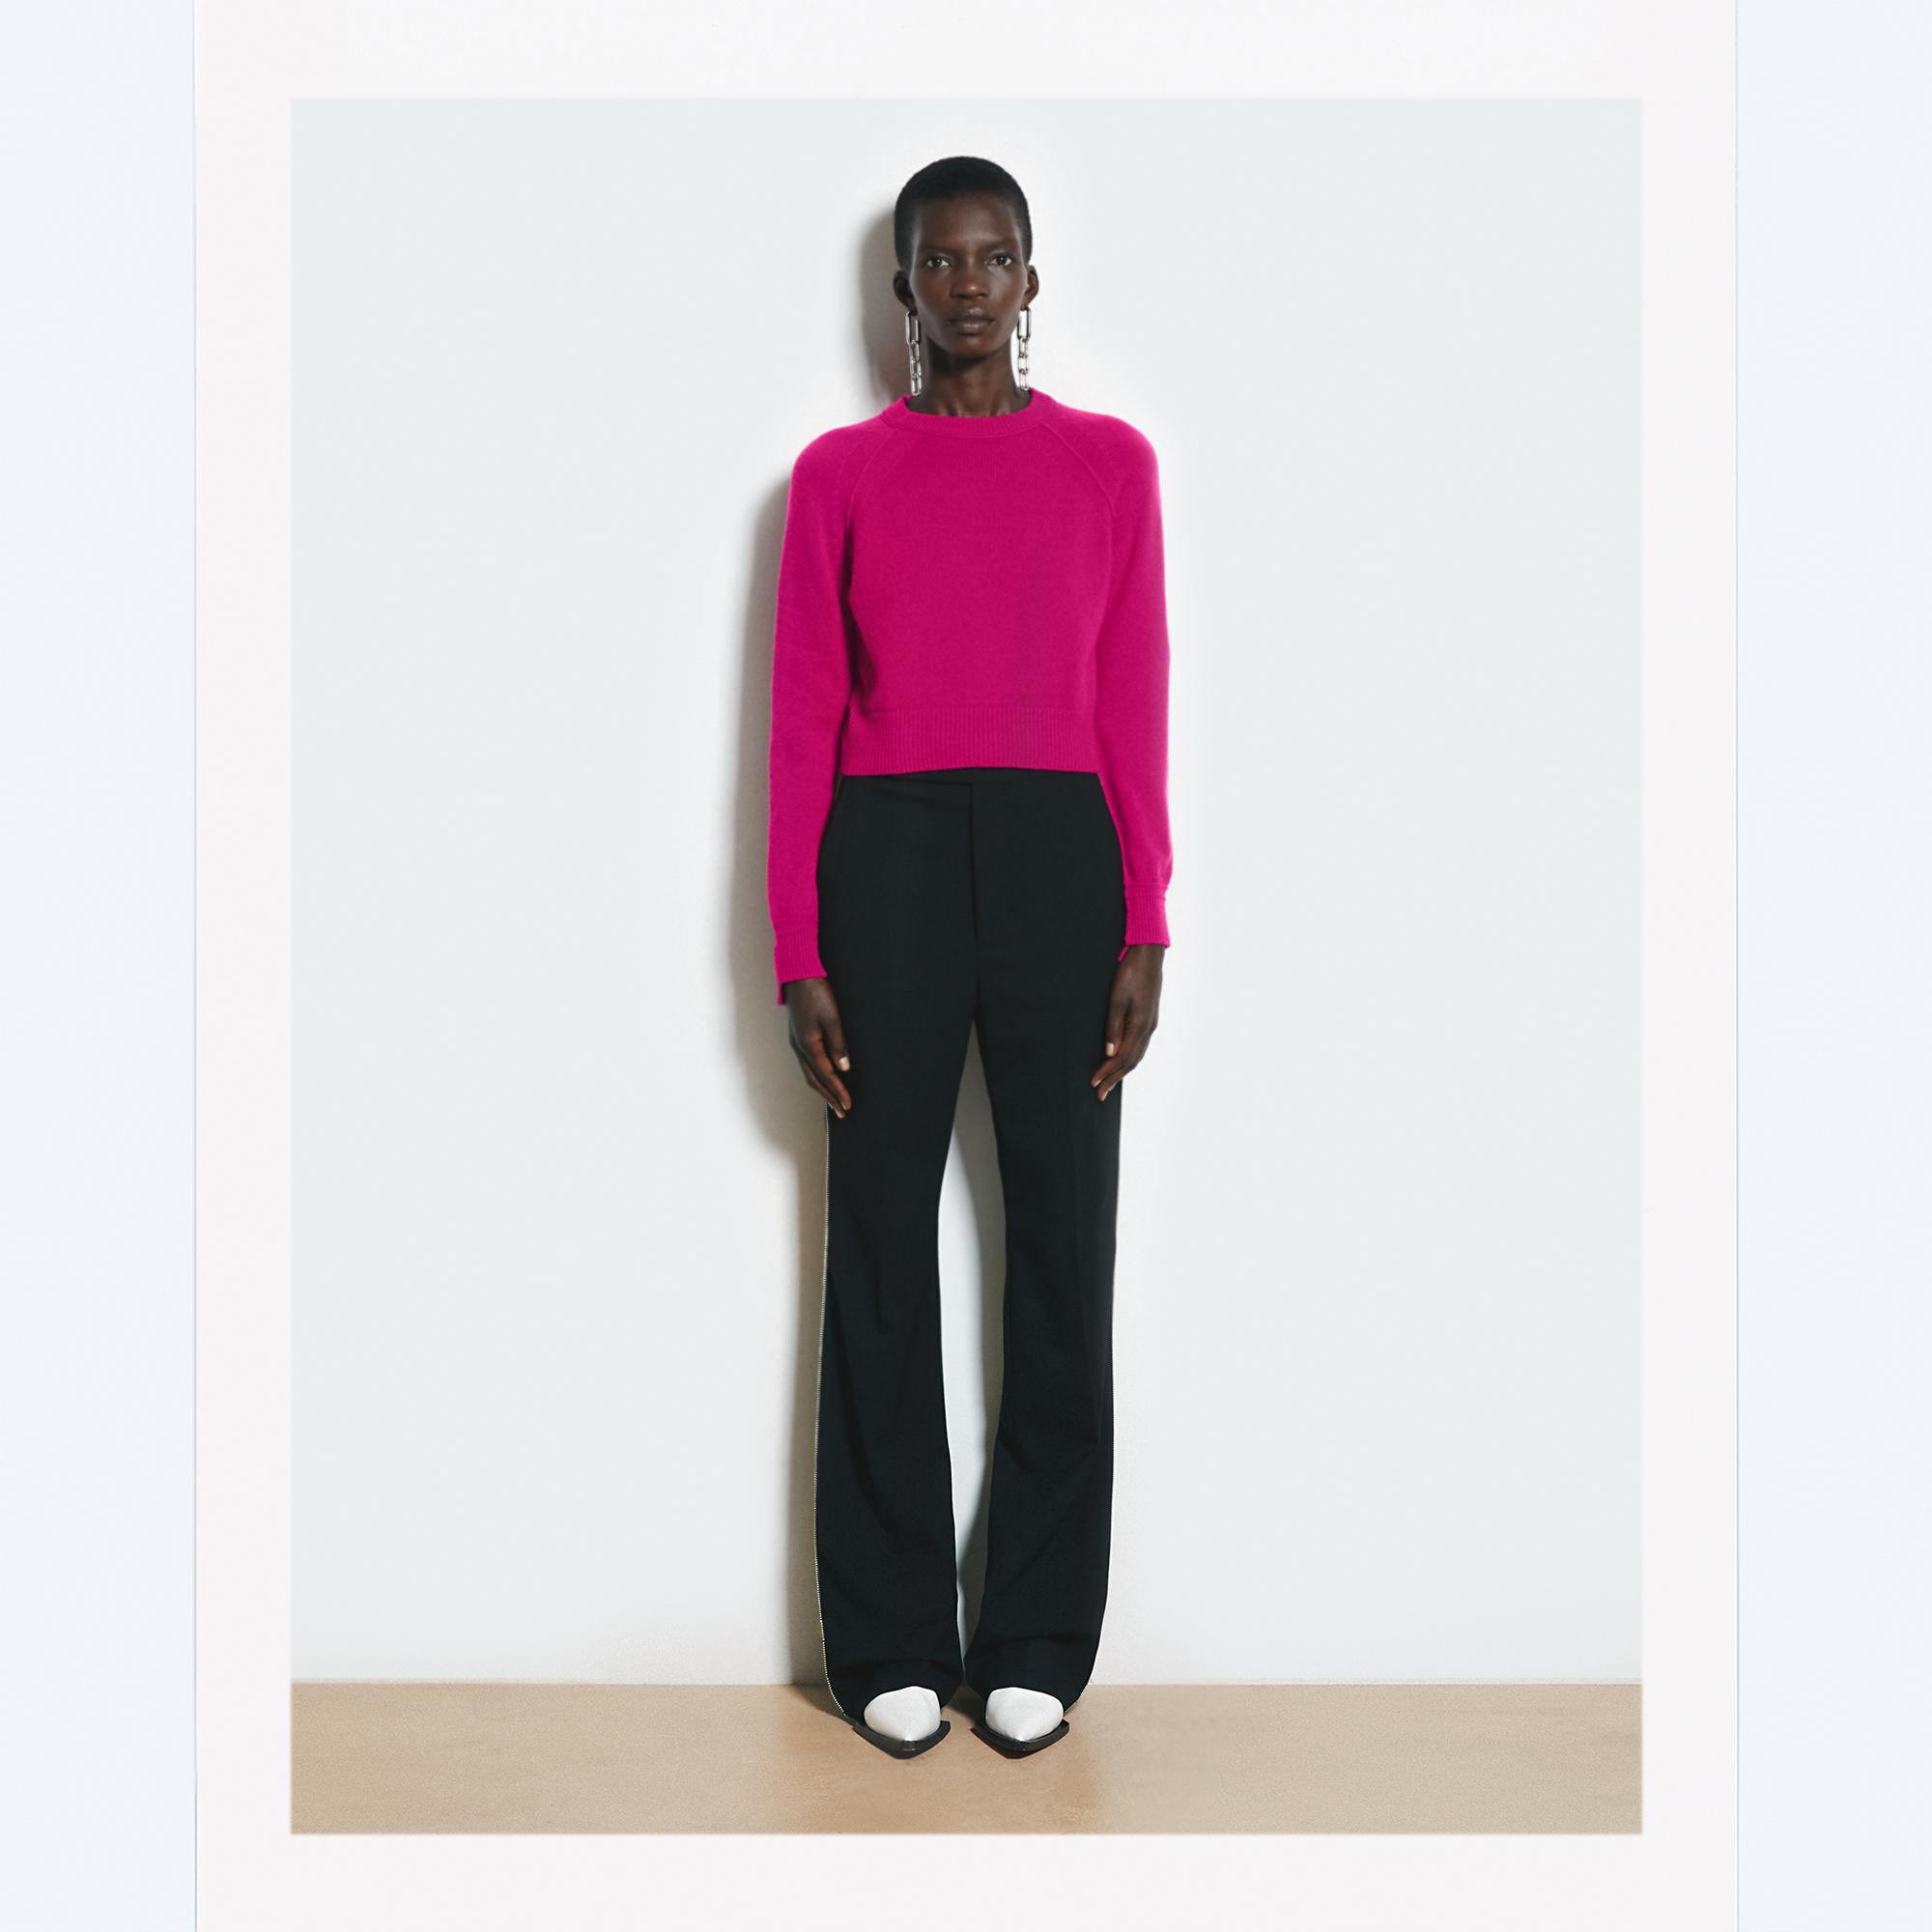 Helmut Lang | Collection | Official site